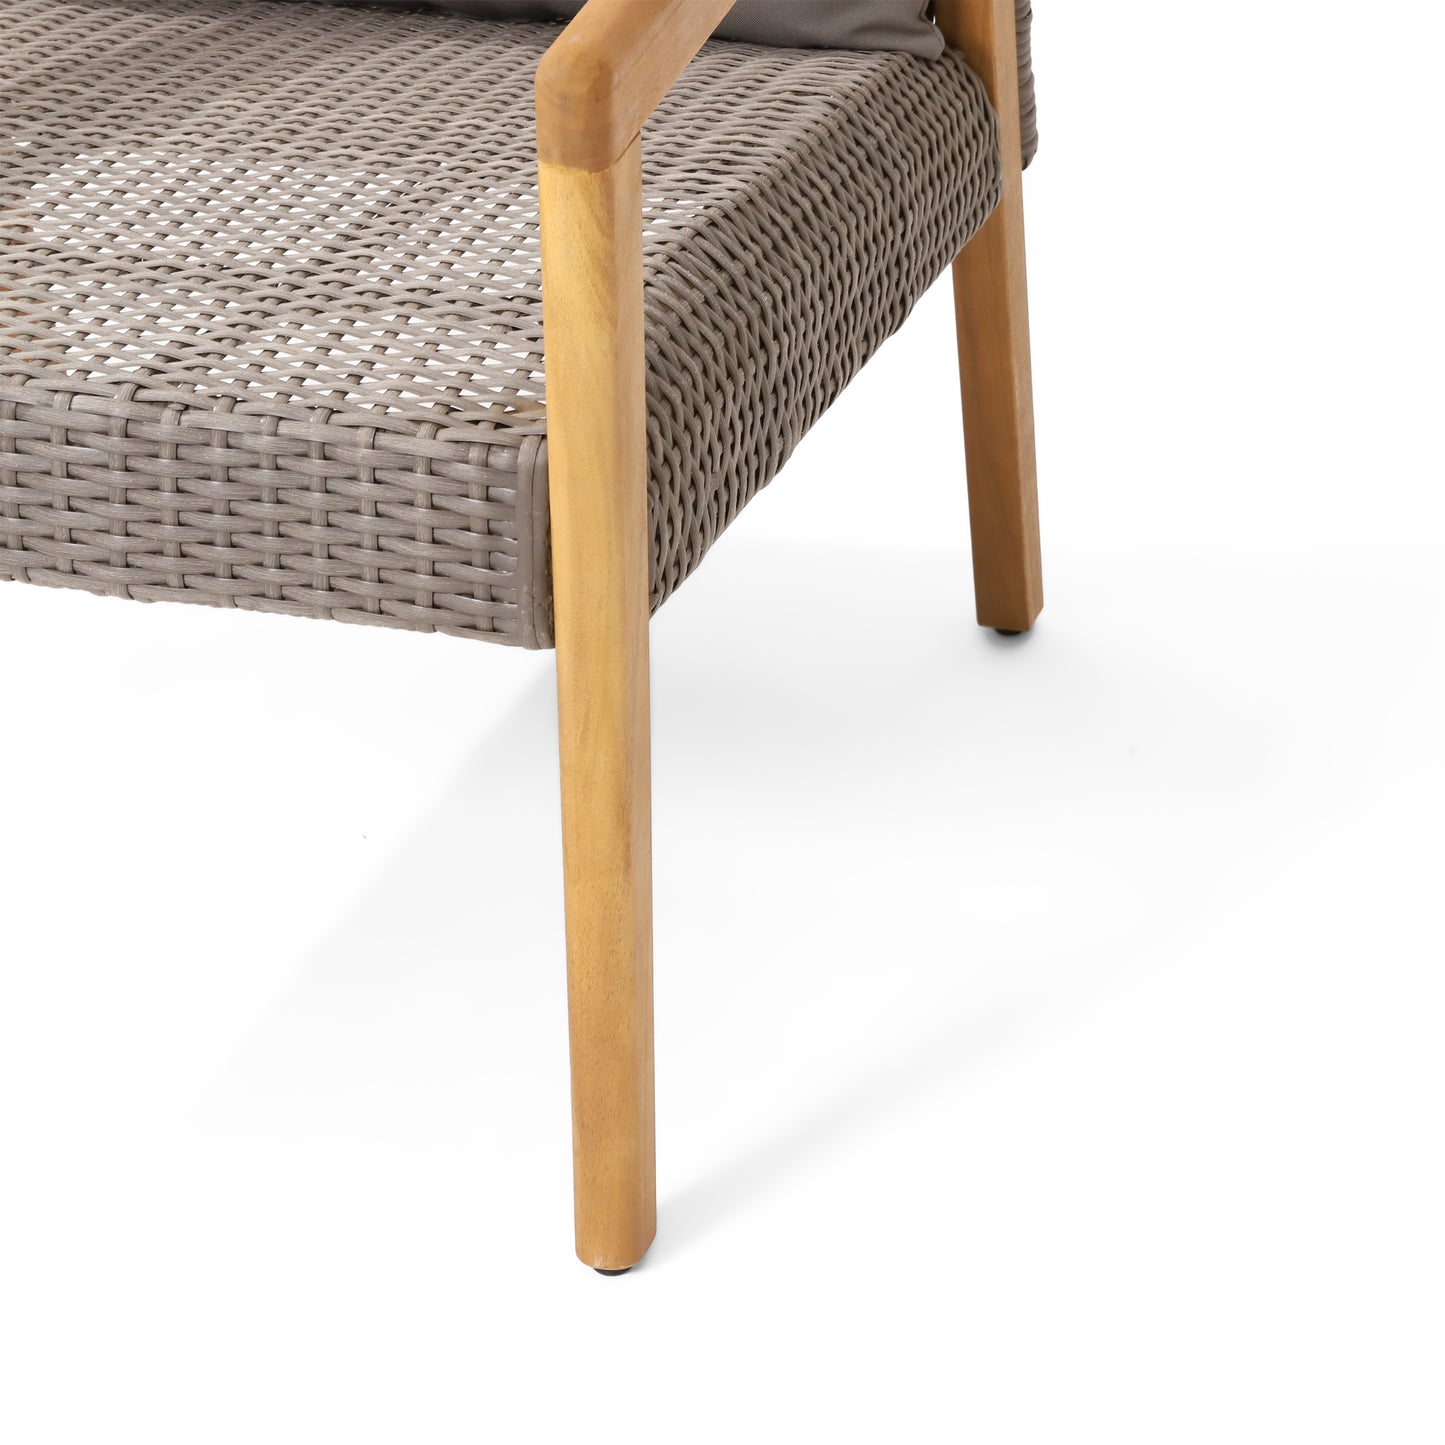 Breck Outdoor Acacia Wood and Wicker Club Chair